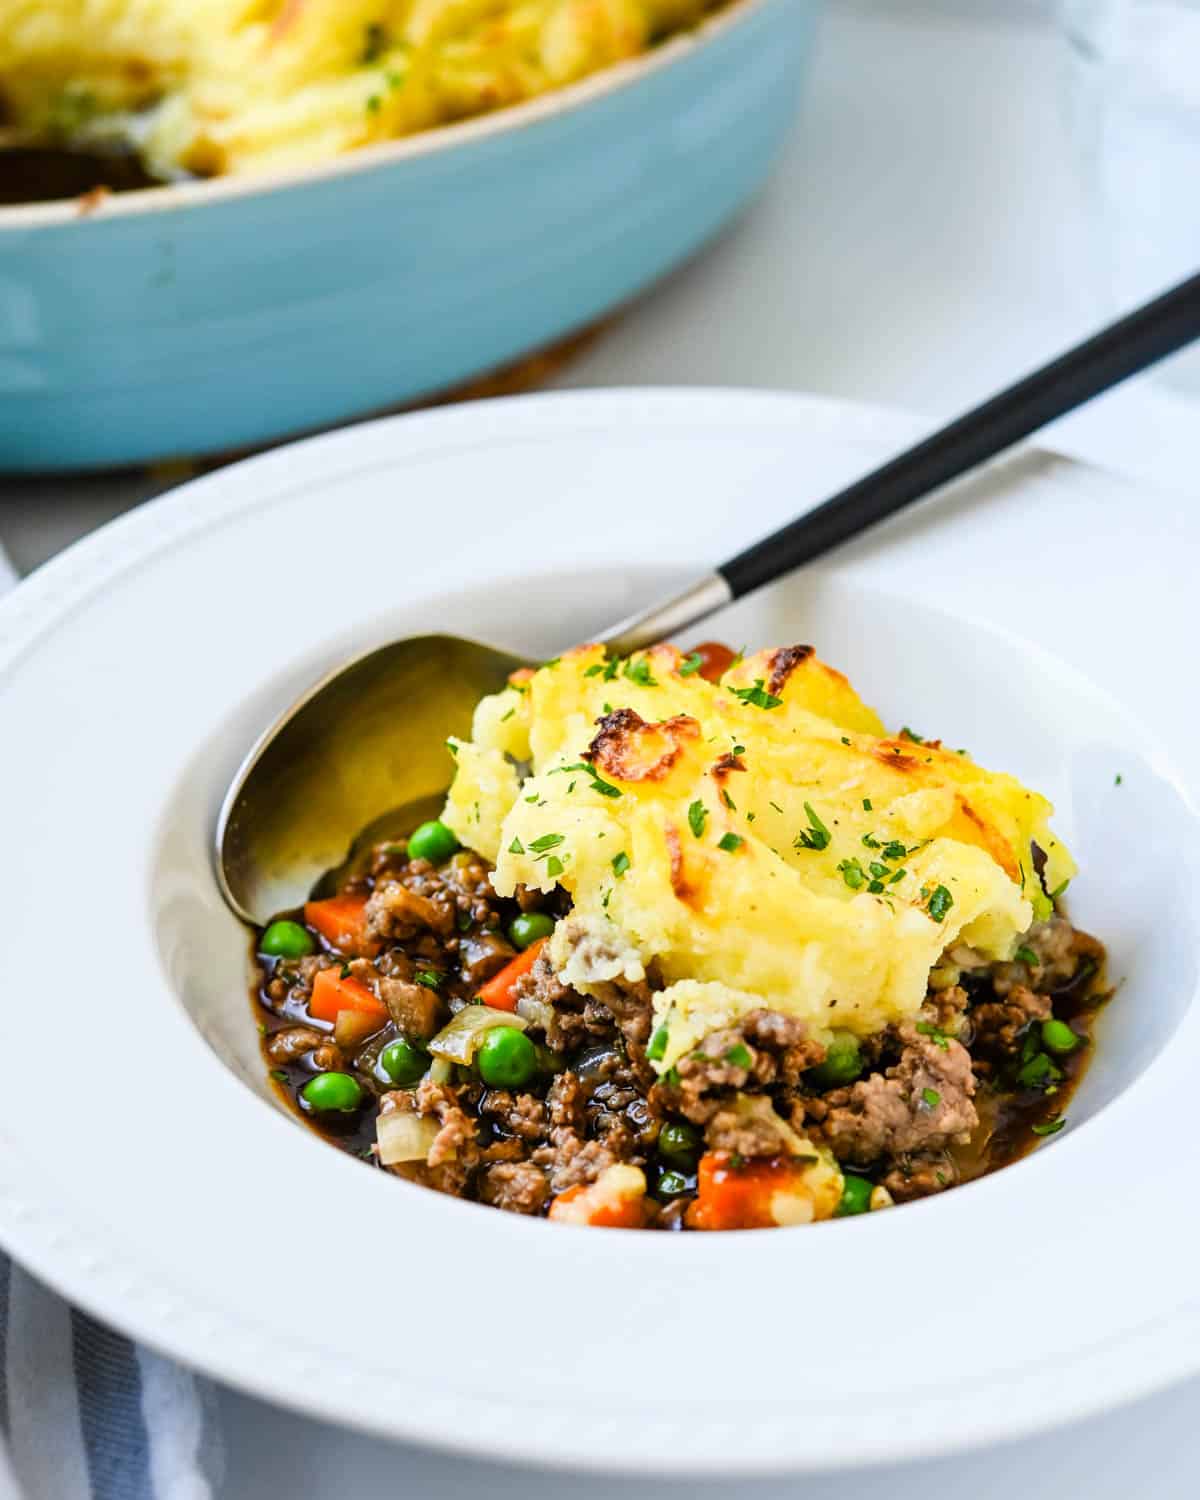 A serving of cottage pie with a spoon.